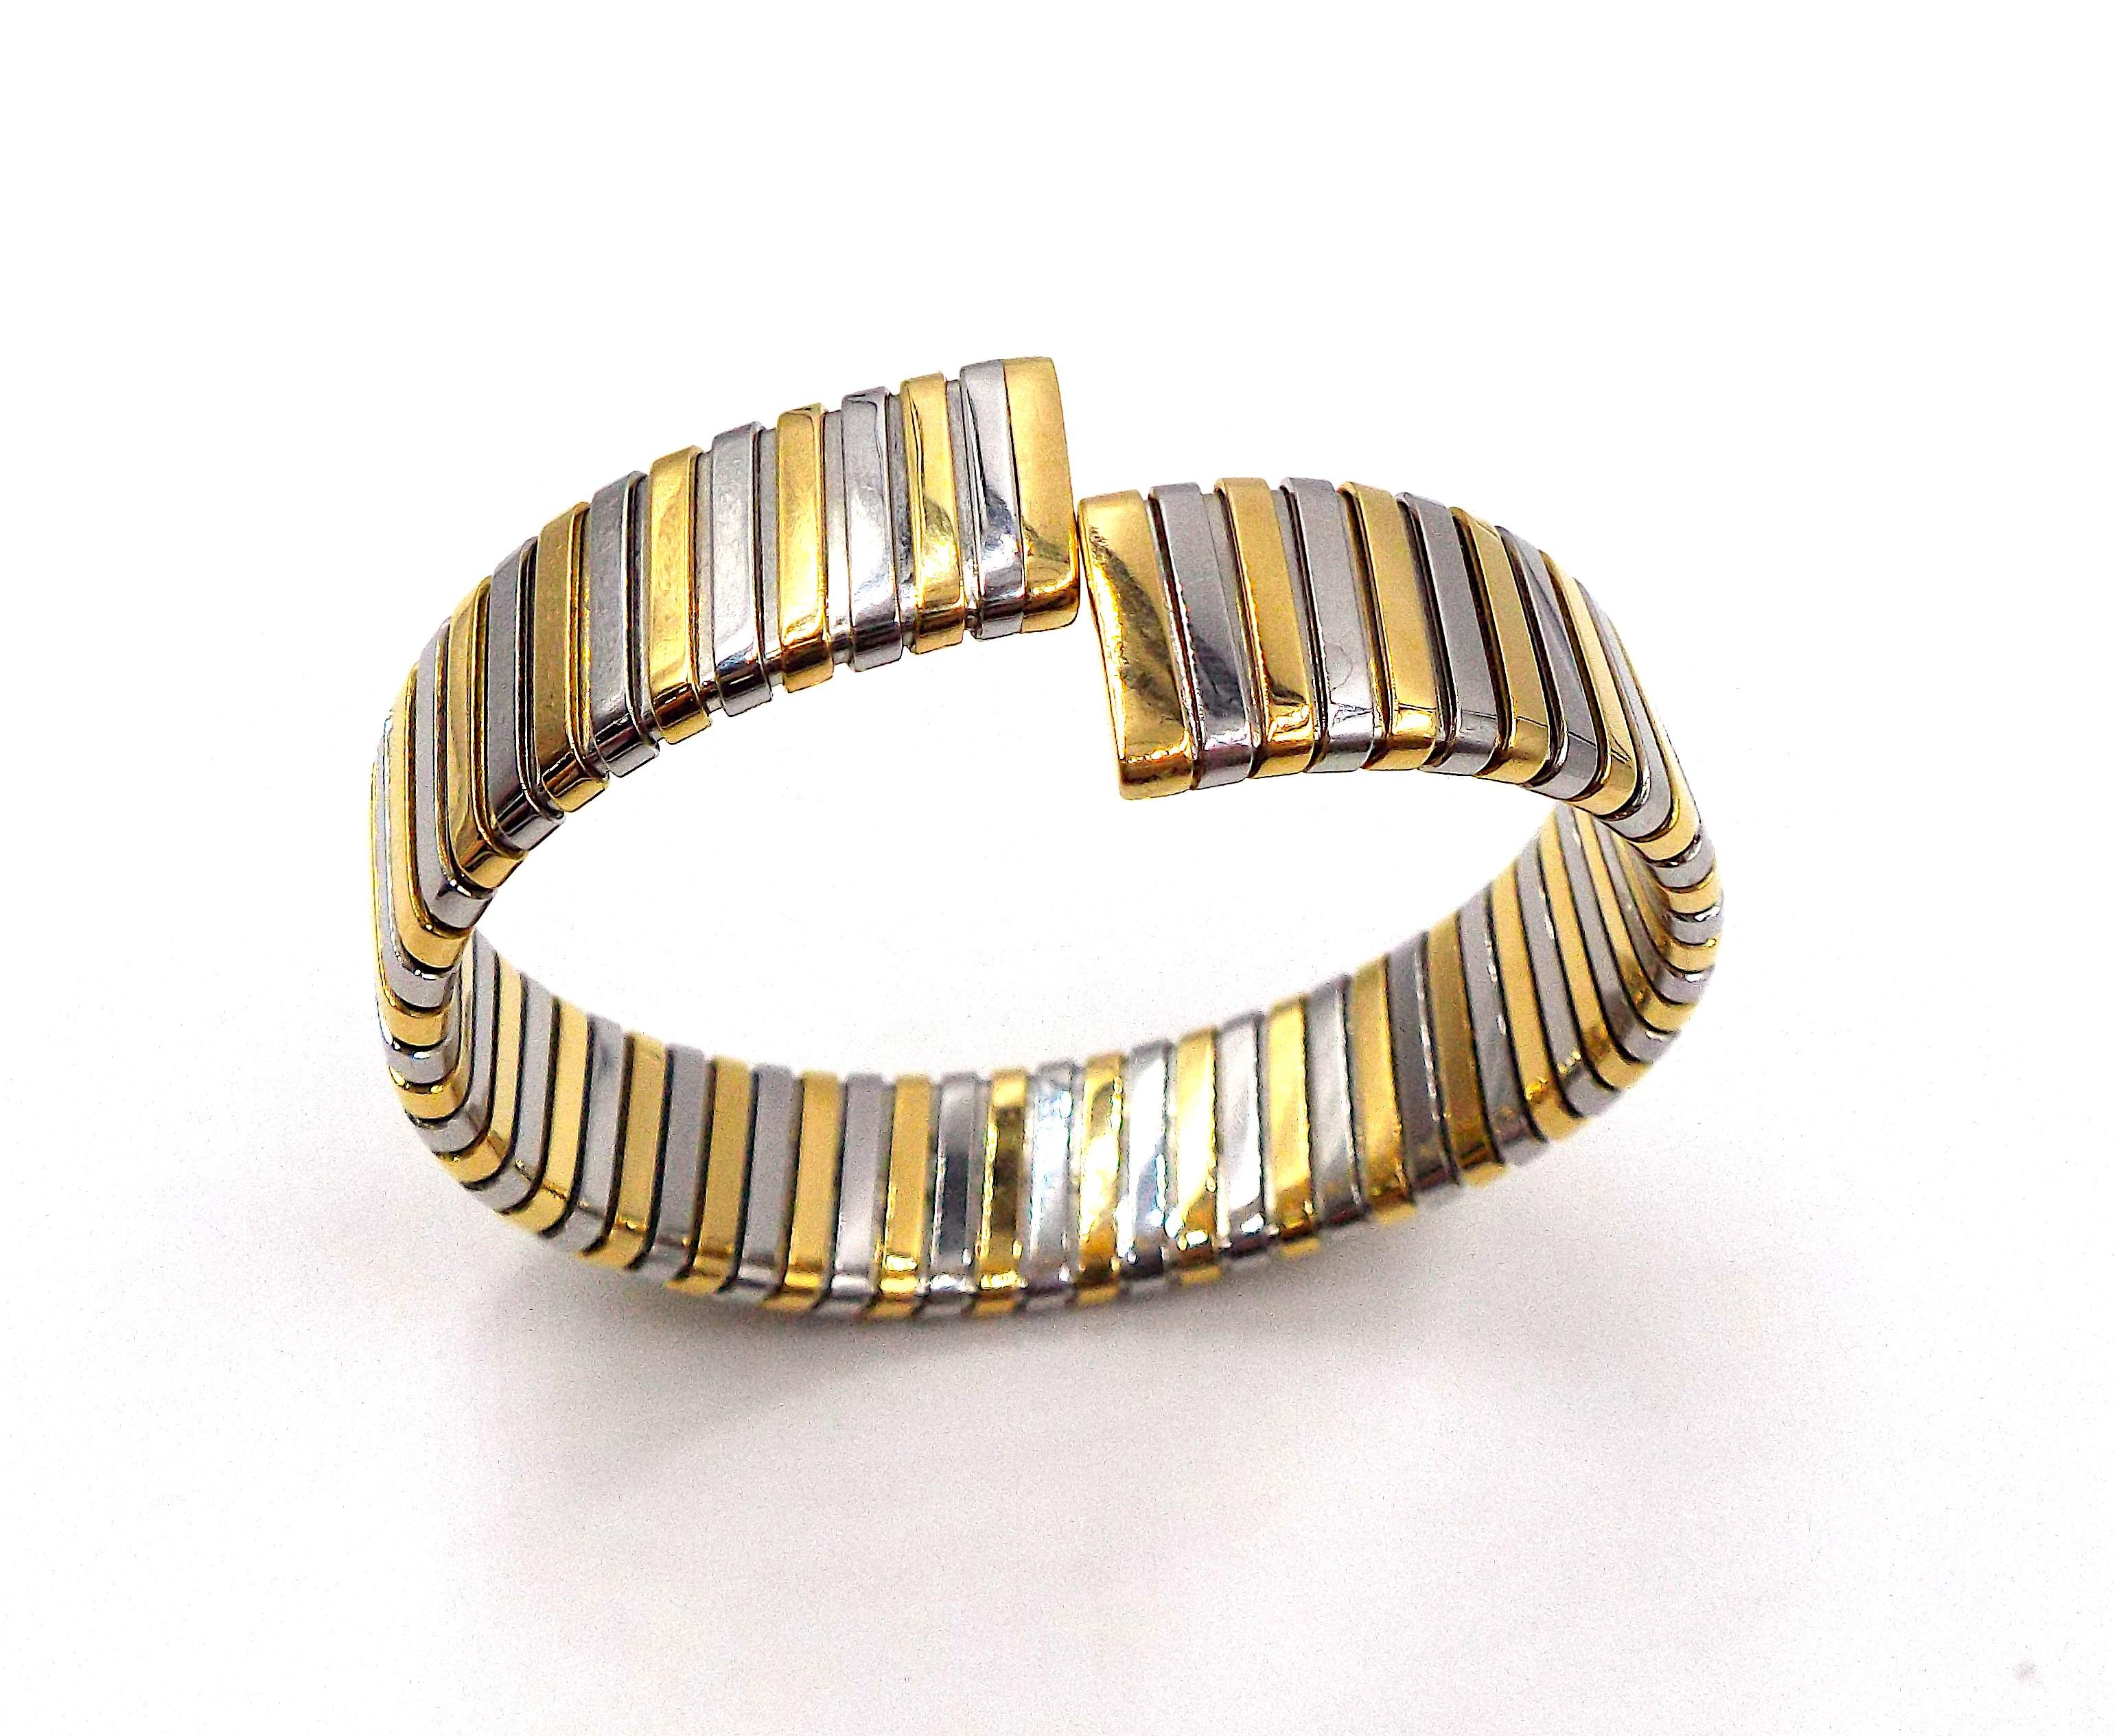 A stylish flexible cuff bracelet made of steel and 18K yellow gold by Bulgari. Gross weight 40.2g, inner circumference approximately 6